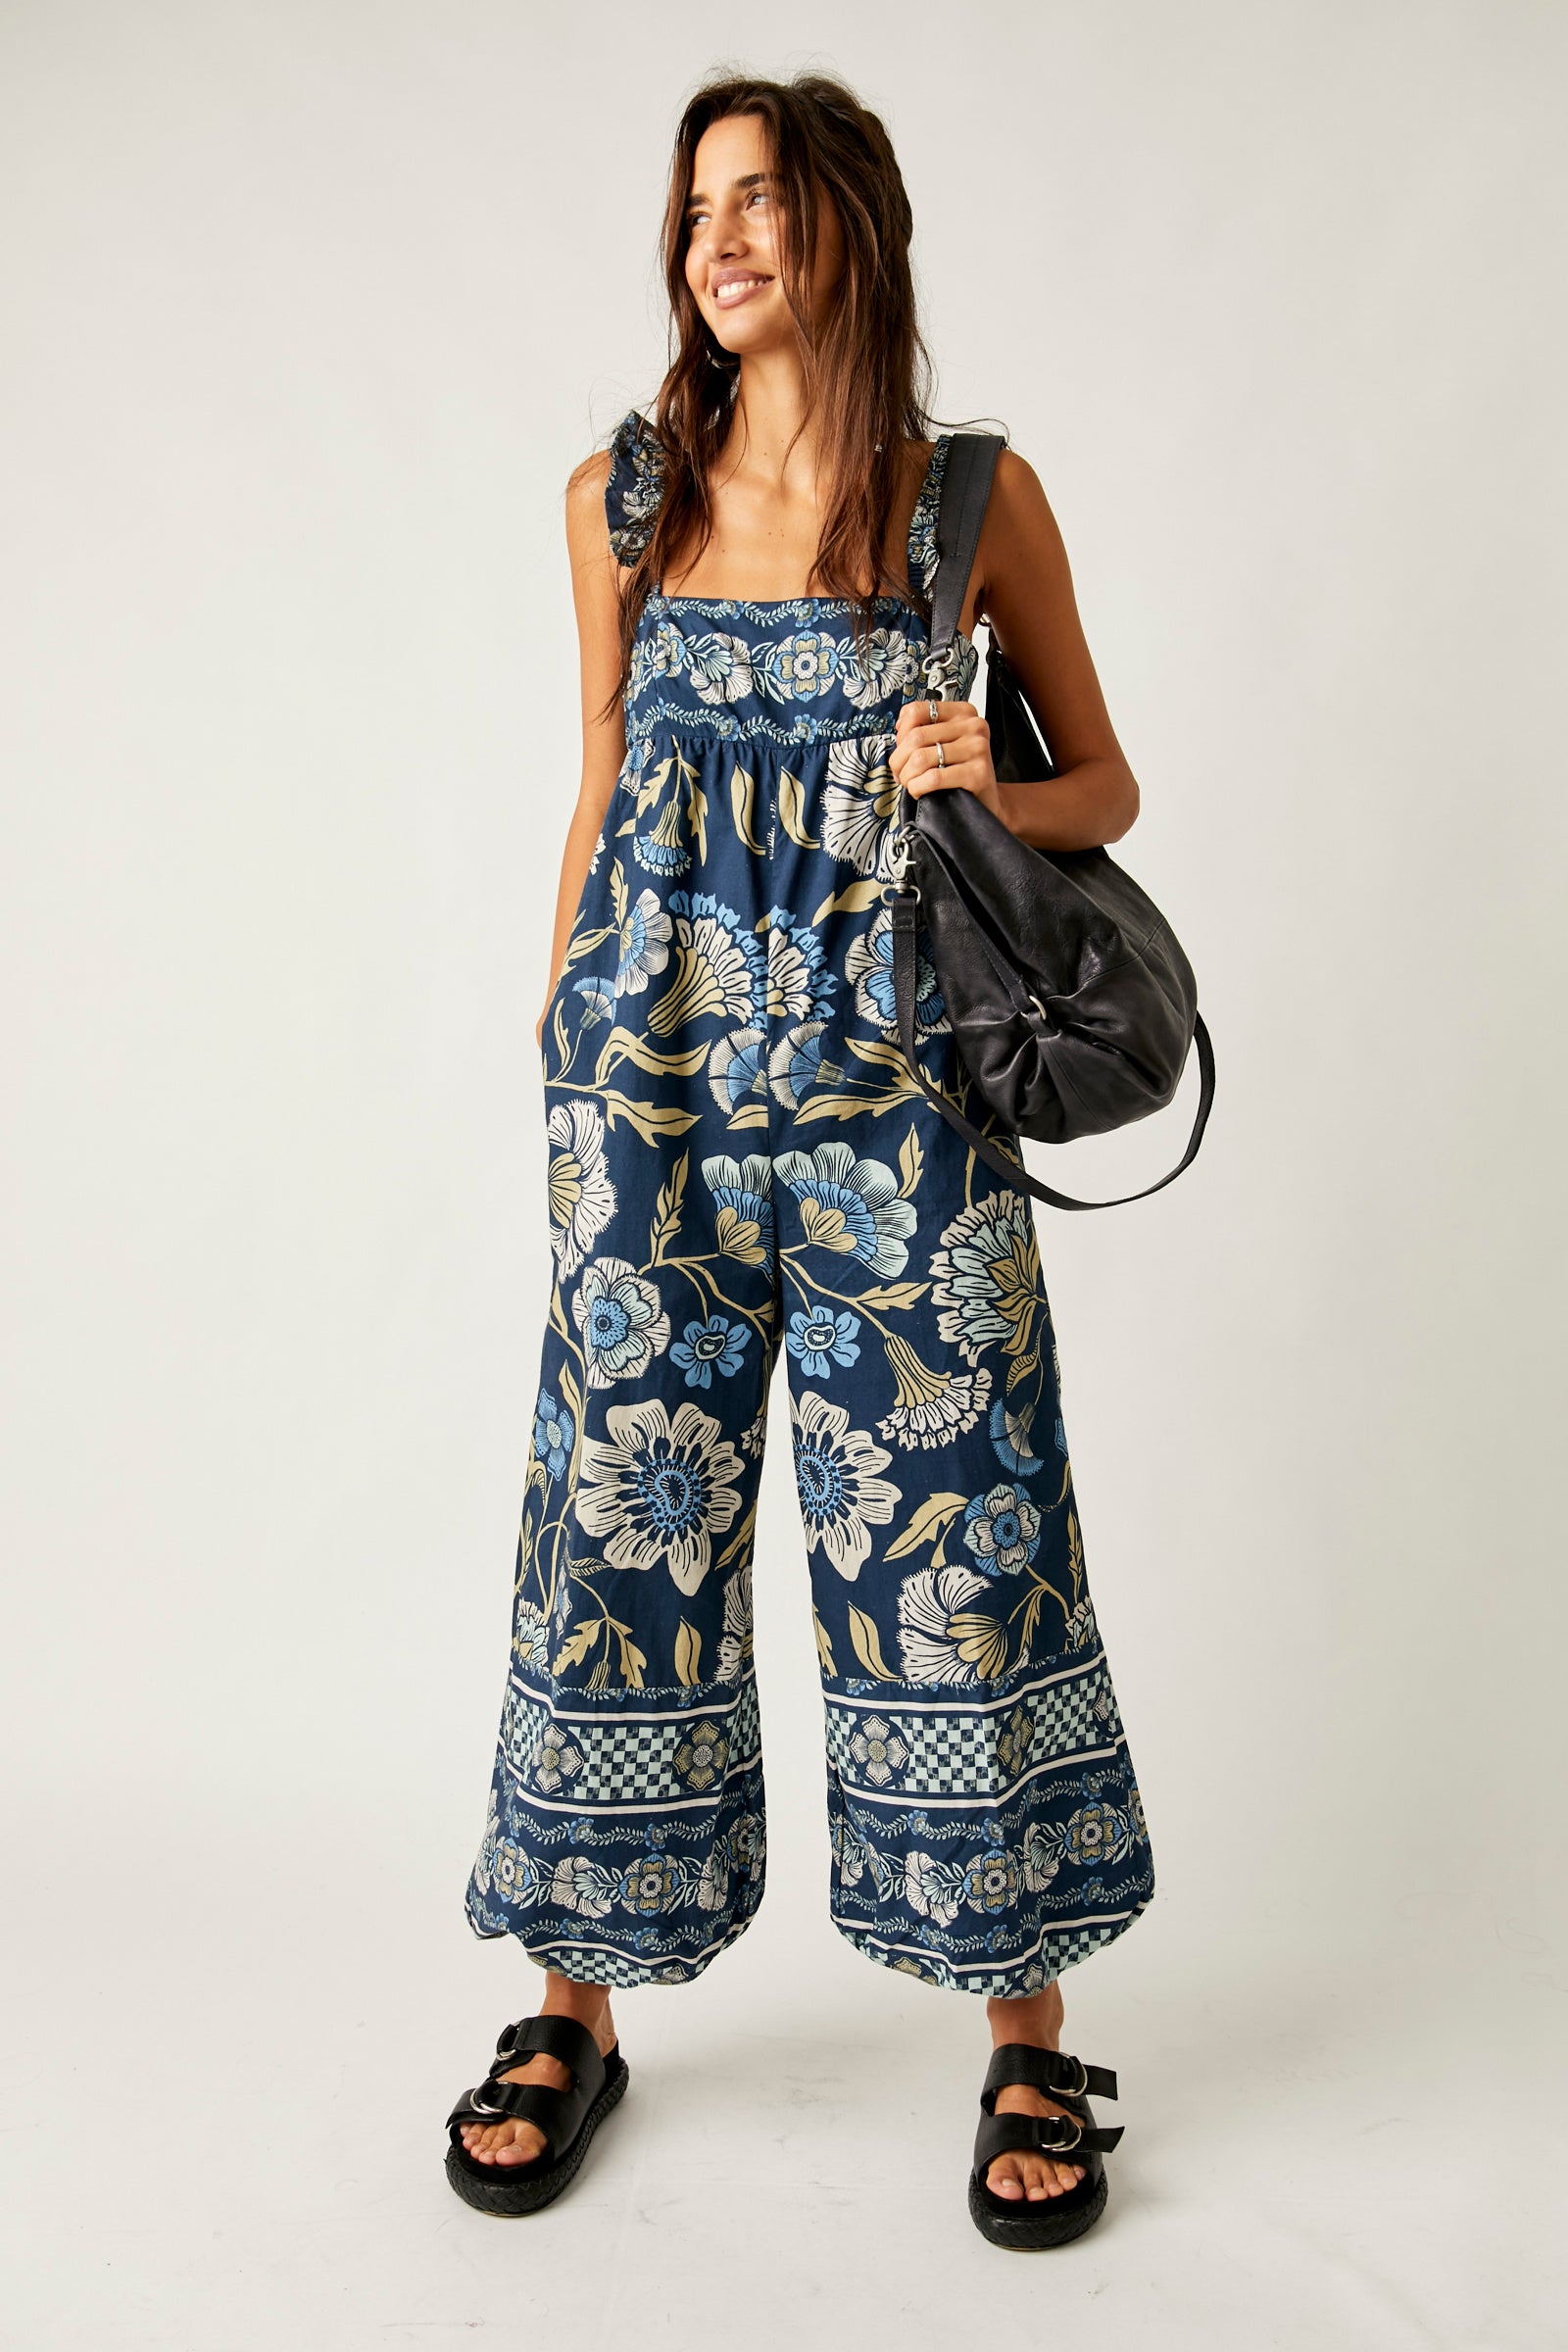 FREE PEOPLE BALI ALBRIGHT JUMPSUIT IN NAVY